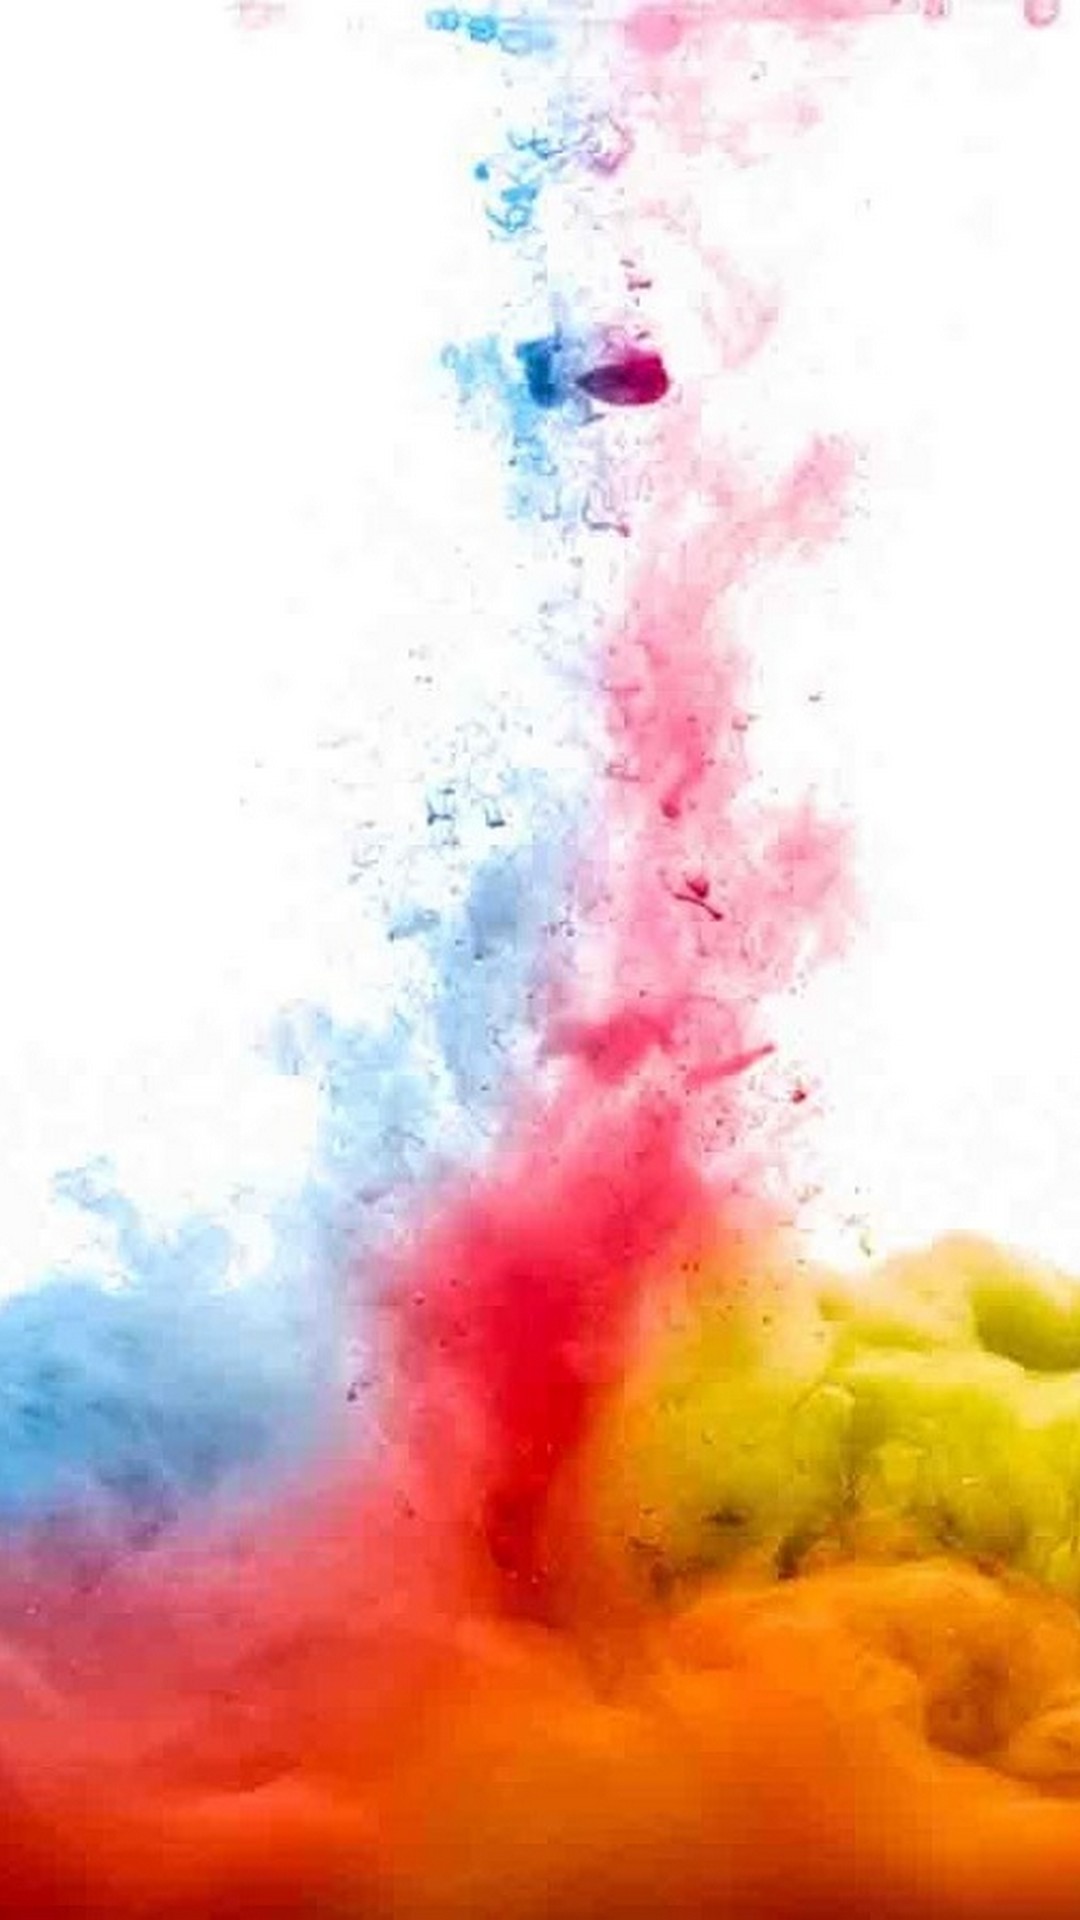 Colorful Paint Liquid Wallpaper iPhone resolution 1080x1920